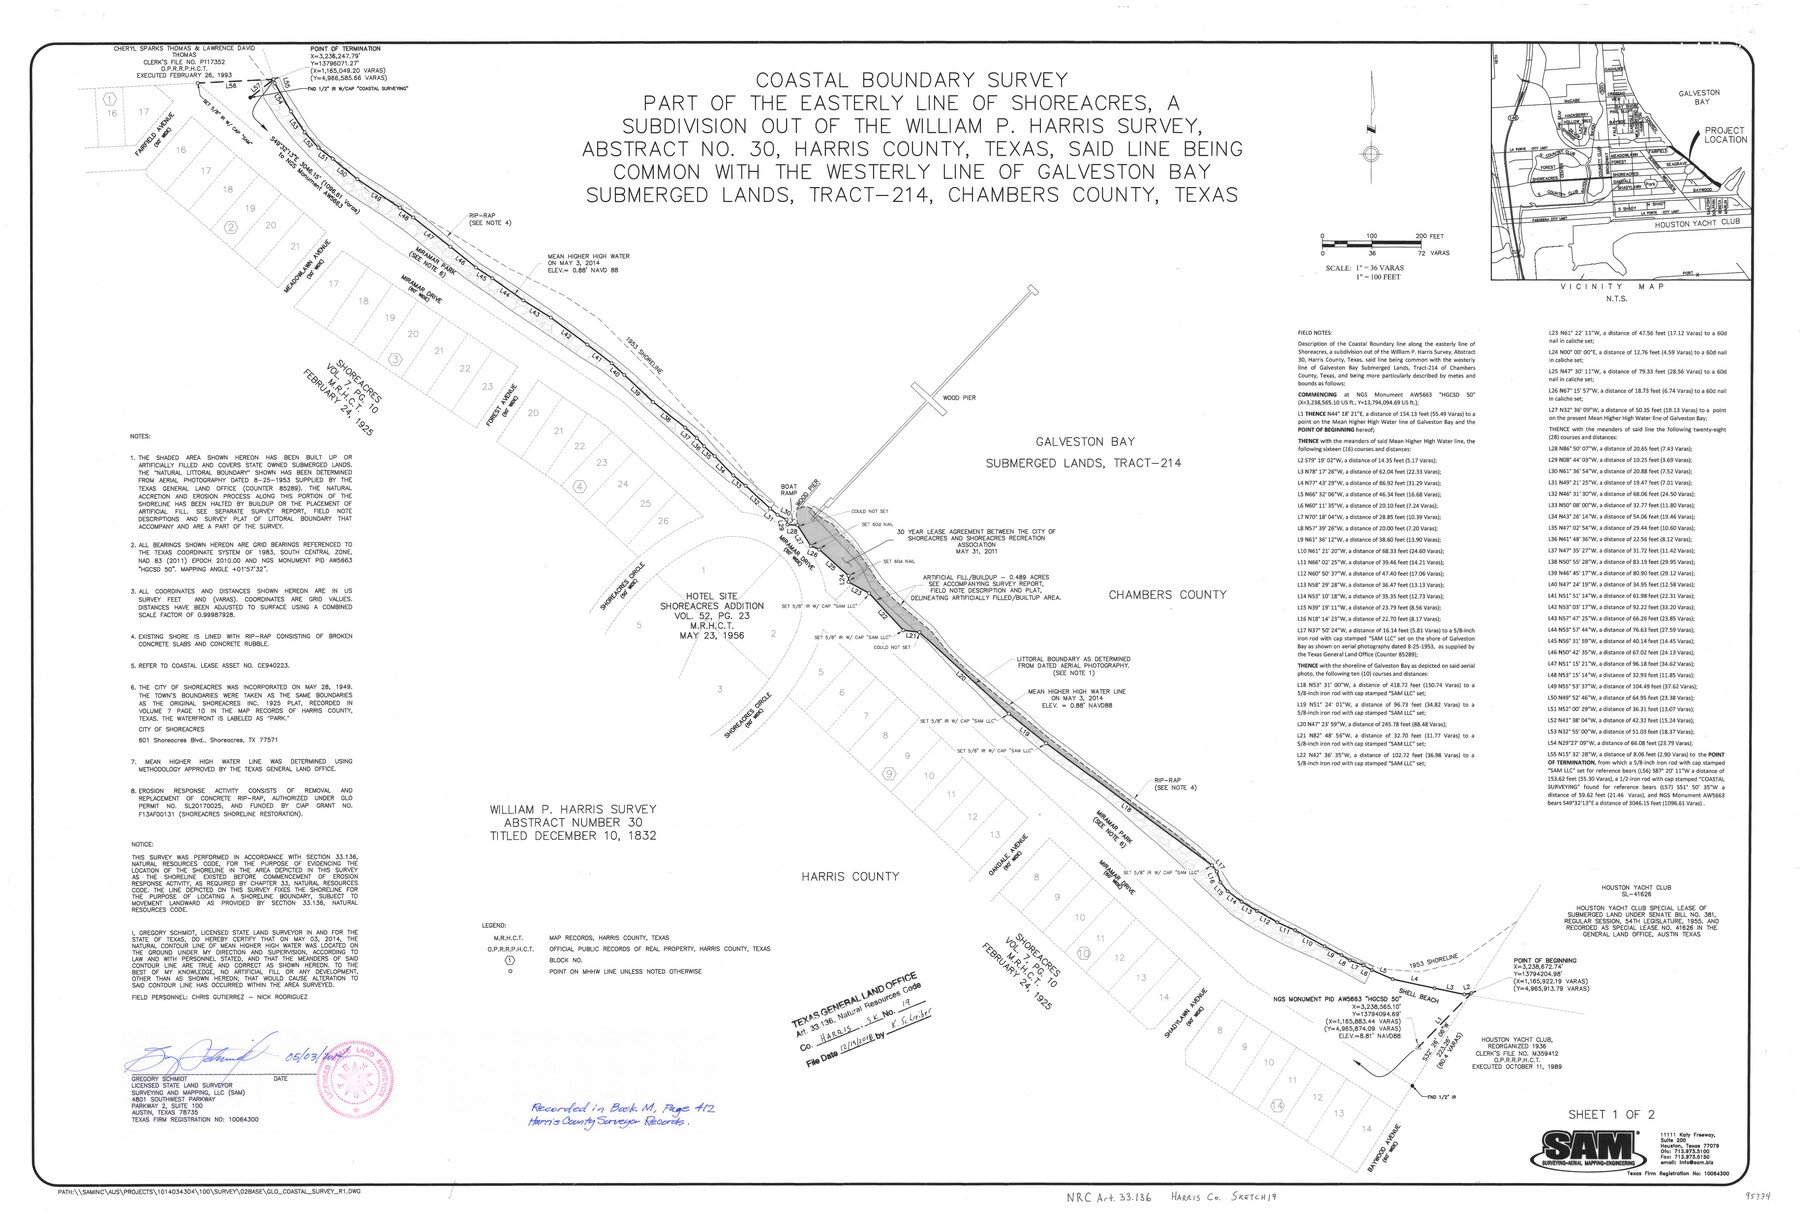 95334, Harris County NRC Article 33.136 Sketch 19, General Map Collection